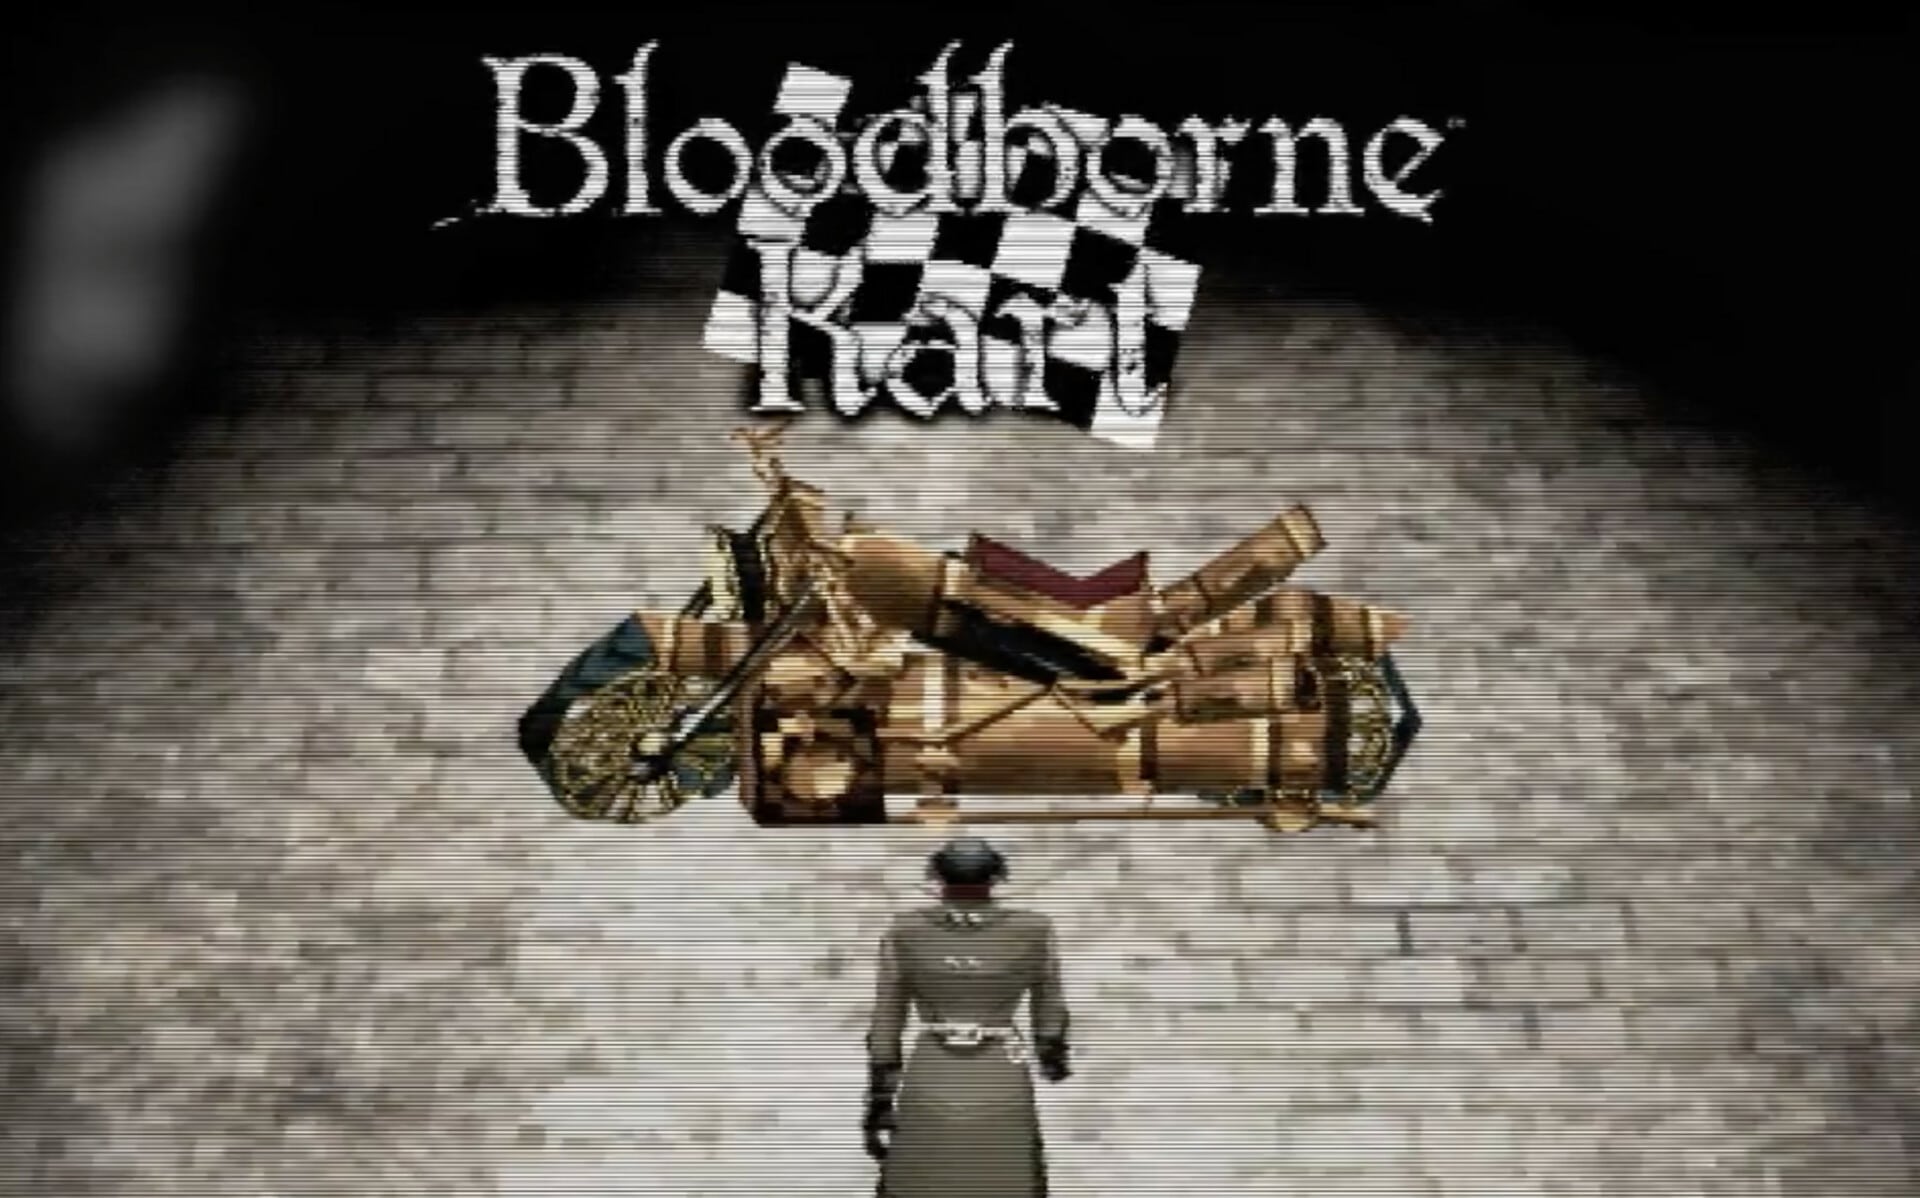 Bloodborne Kart is another PS1 style fan project kart racer from Bloodborne PSX developer Lilith Walther